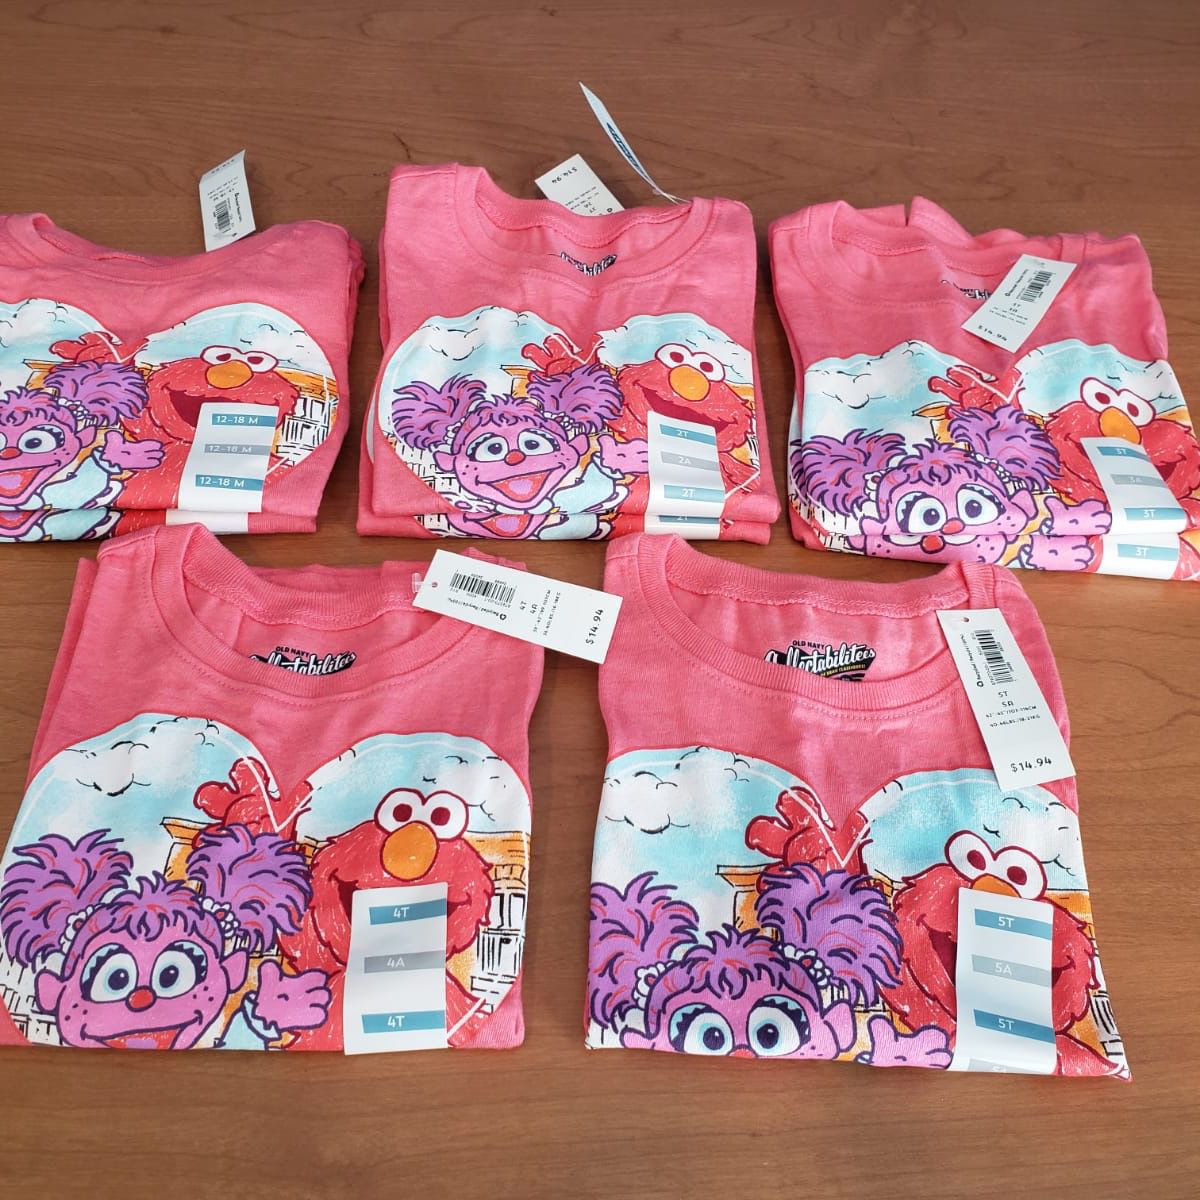 Wholesale Clothing, Kids -babies Old Navy Brand, $1 a Piece, New With Tags